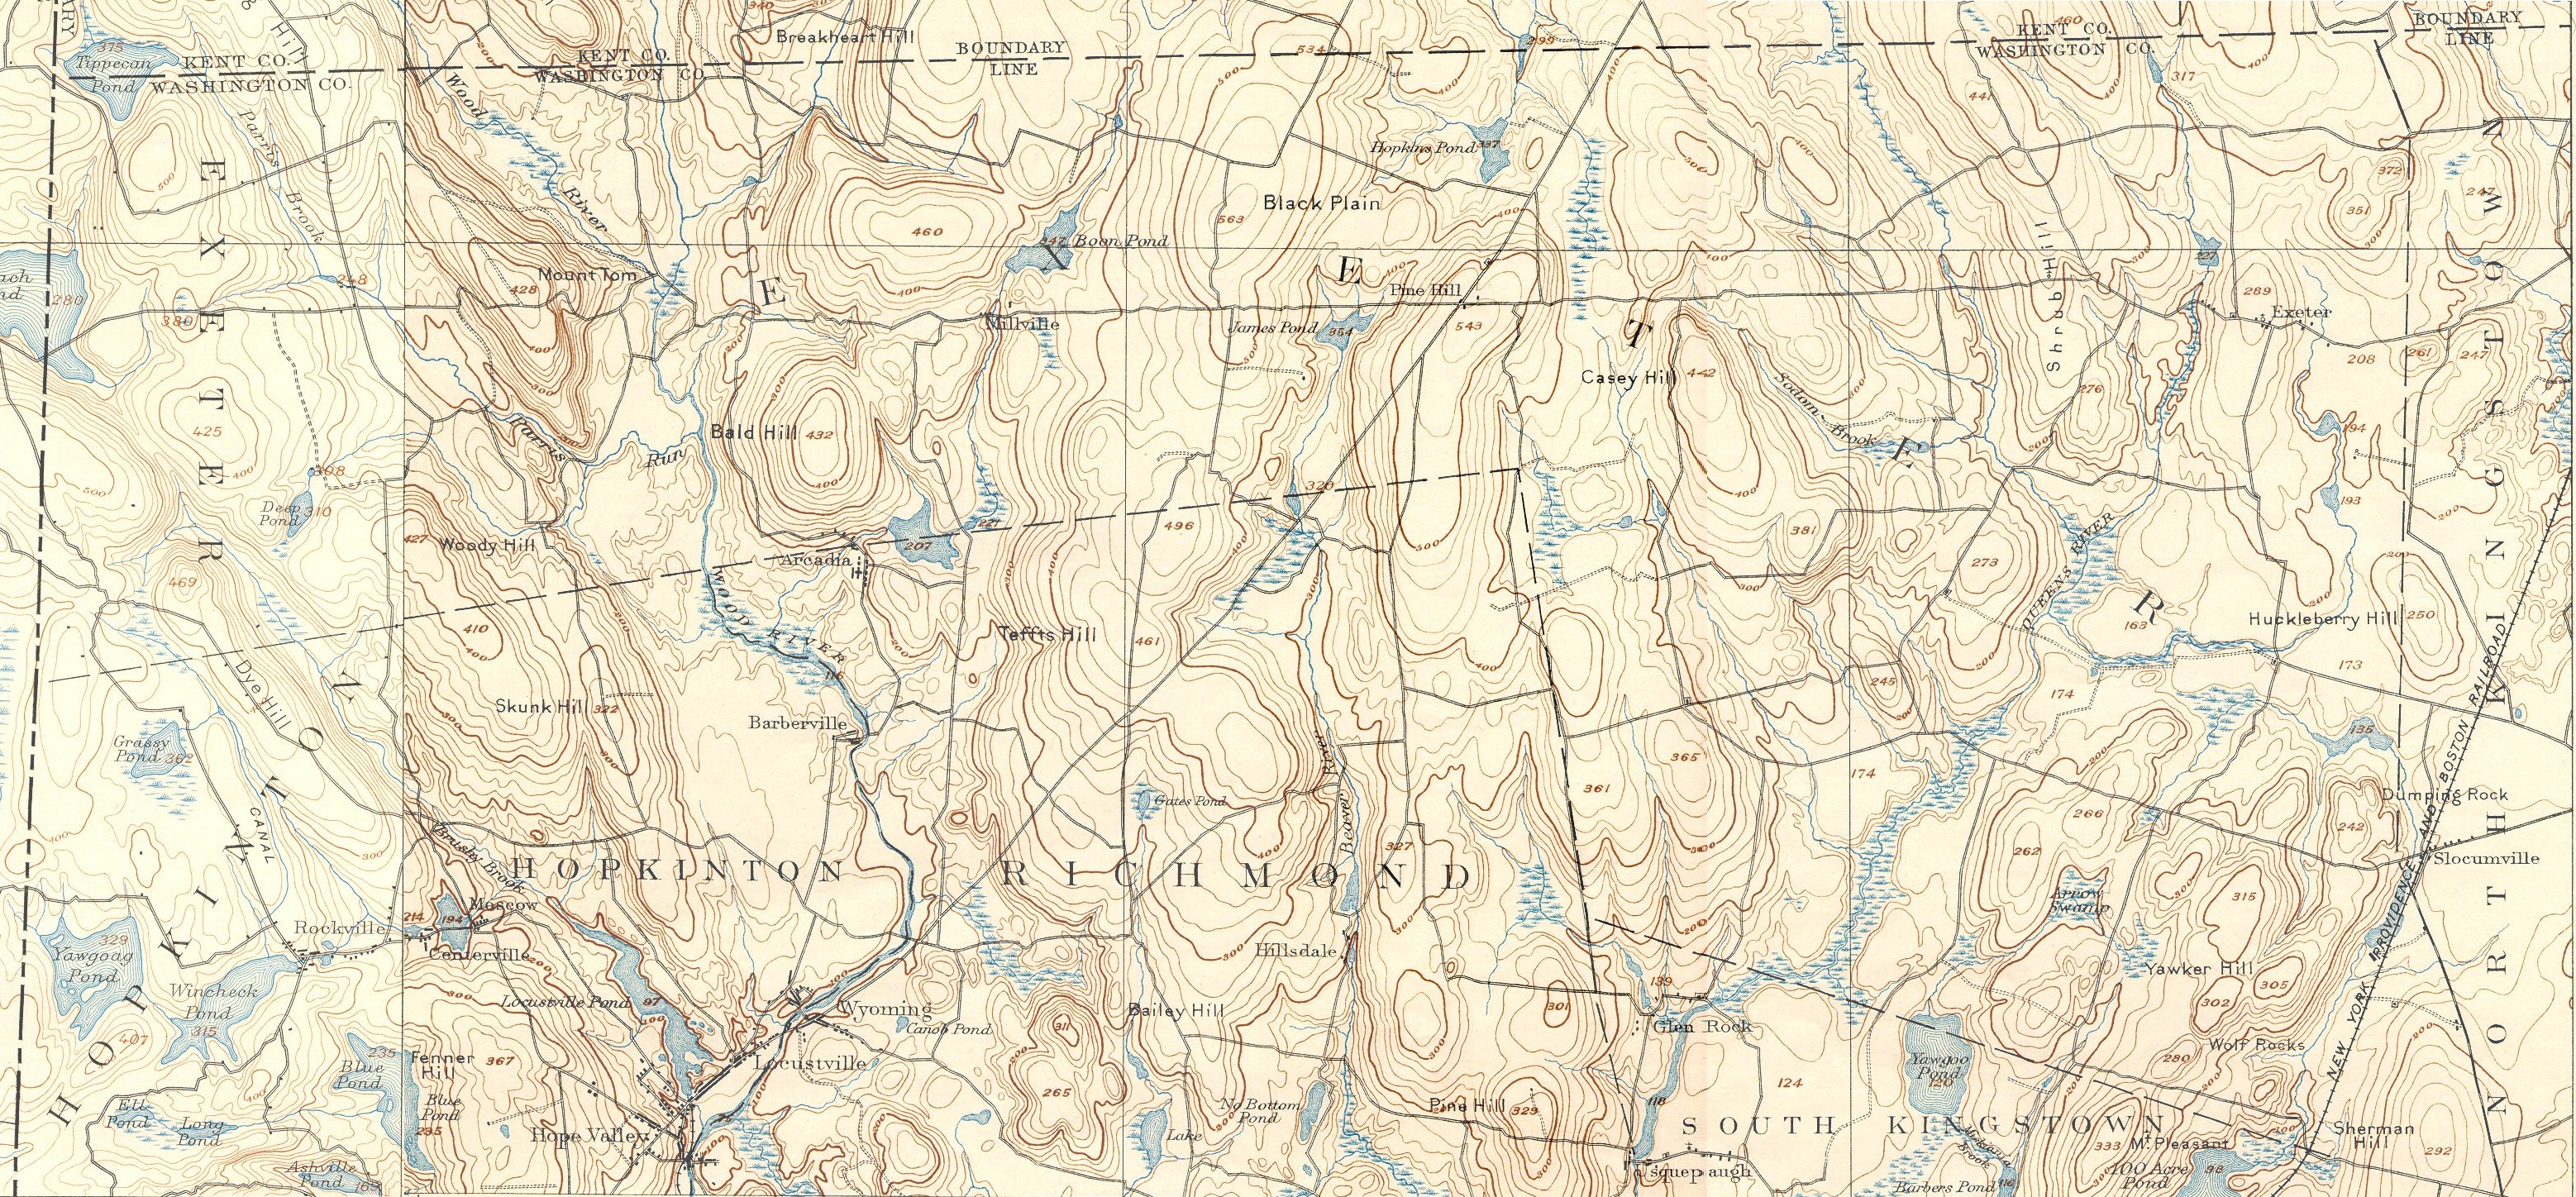 USGS Topographical Map - Exeter, RI - 1894